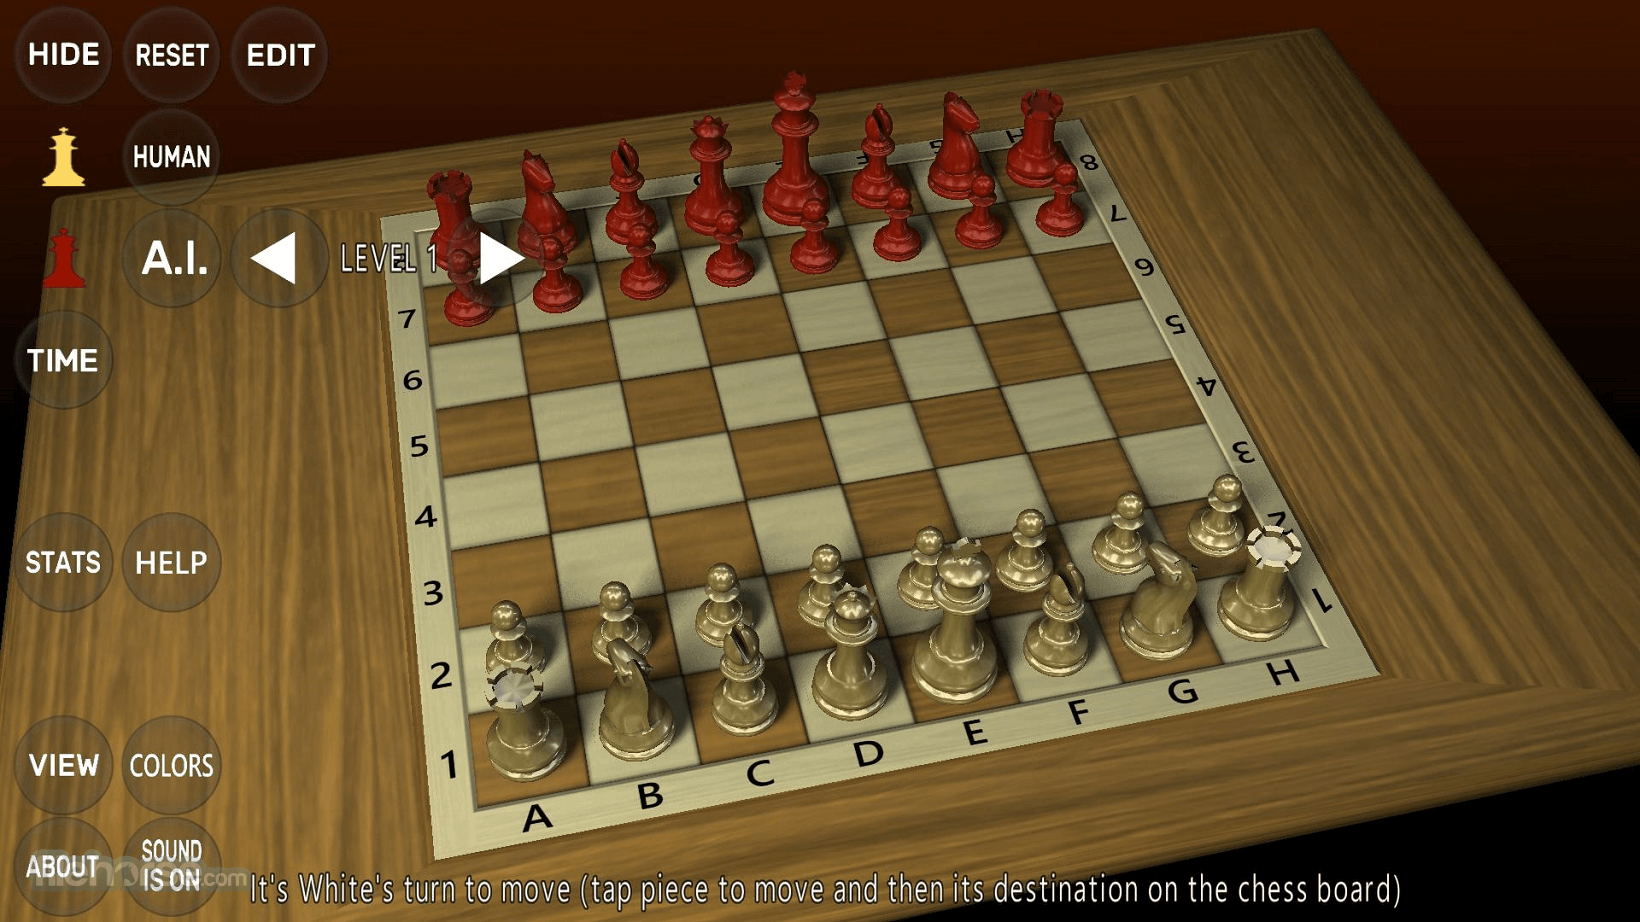 Chess Master 3D - Royal Game for Asus ZenFone Zoom S - free